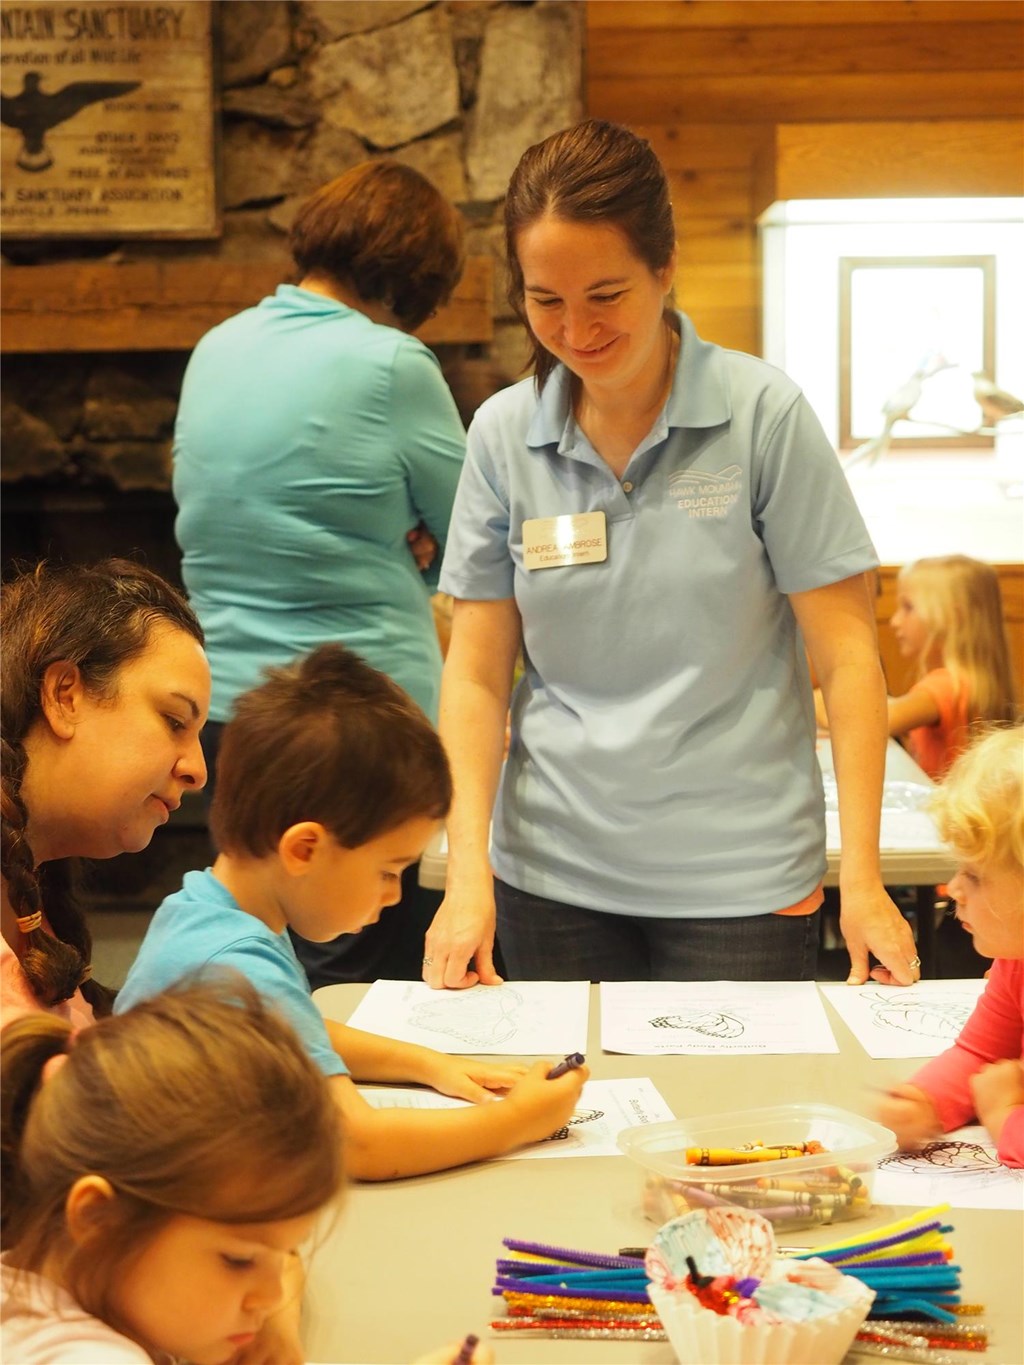 Educator Andrea oversees children completing a craft about butterflies